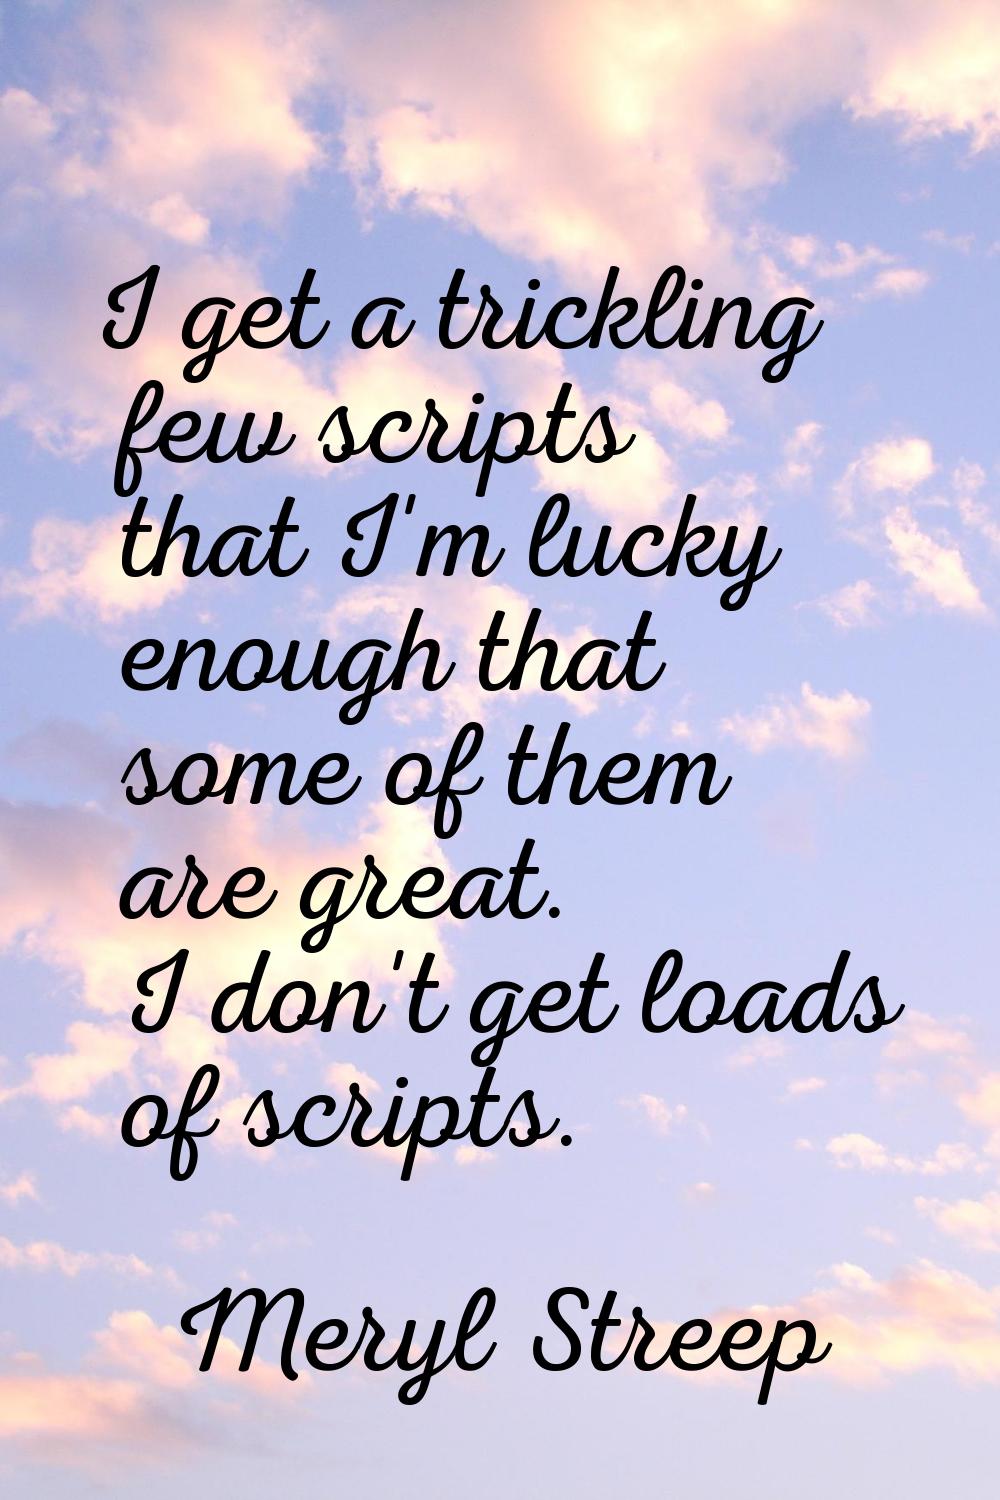 I get a trickling few scripts that I'm lucky enough that some of them are great. I don't get loads 